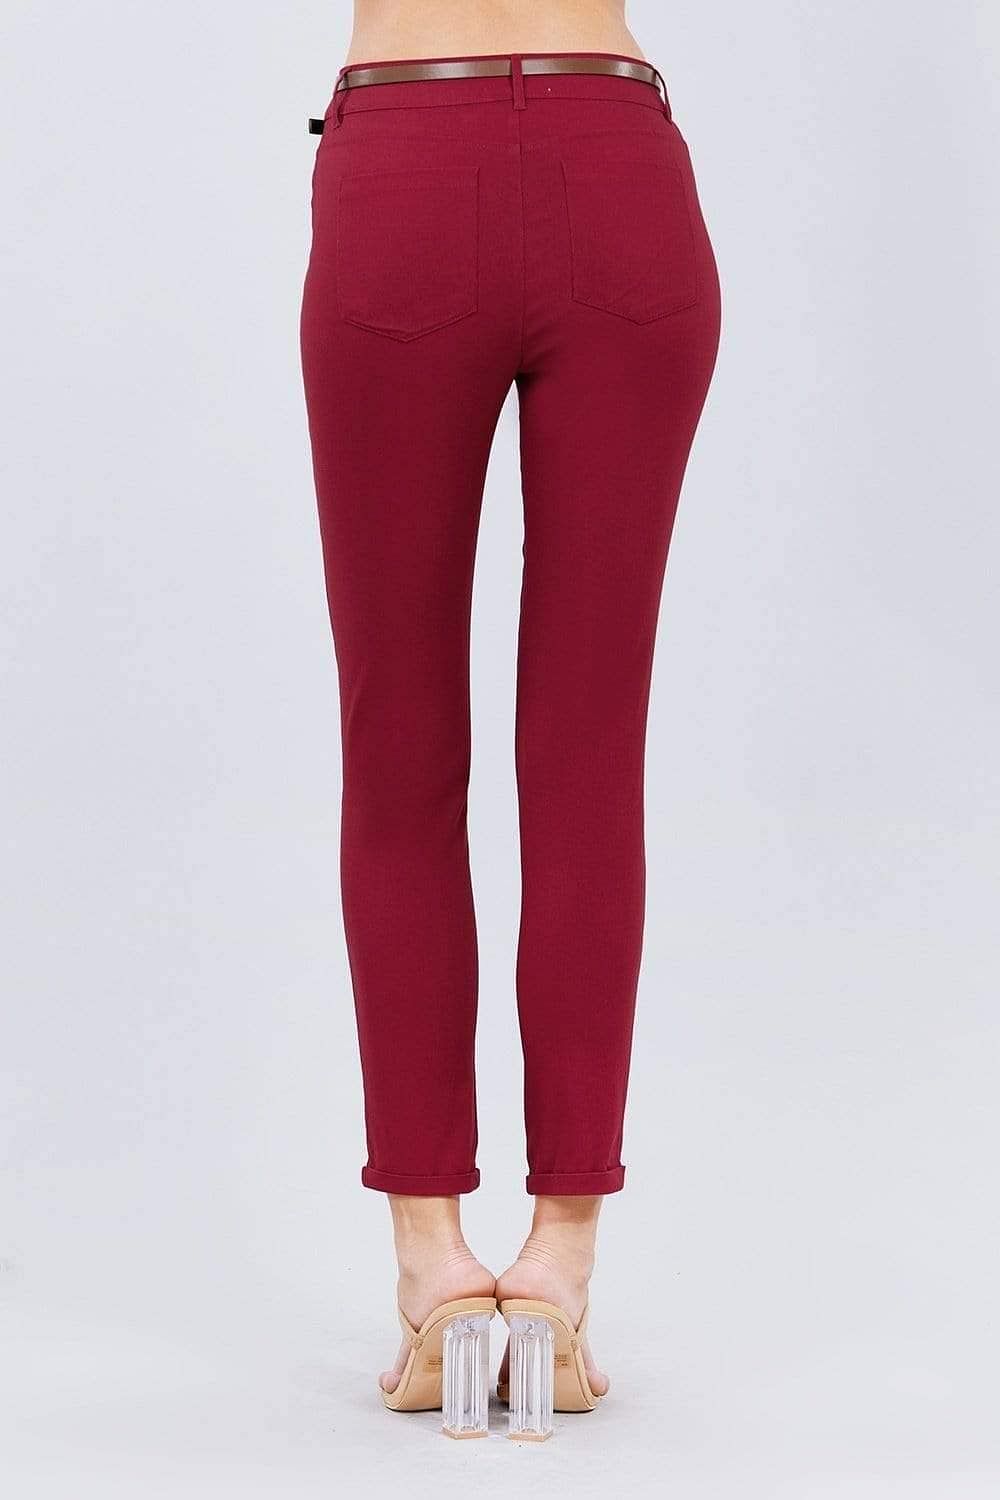 Burgundy Skinny Belted Long Pants - Shopping Therapy, LLC Dress pants